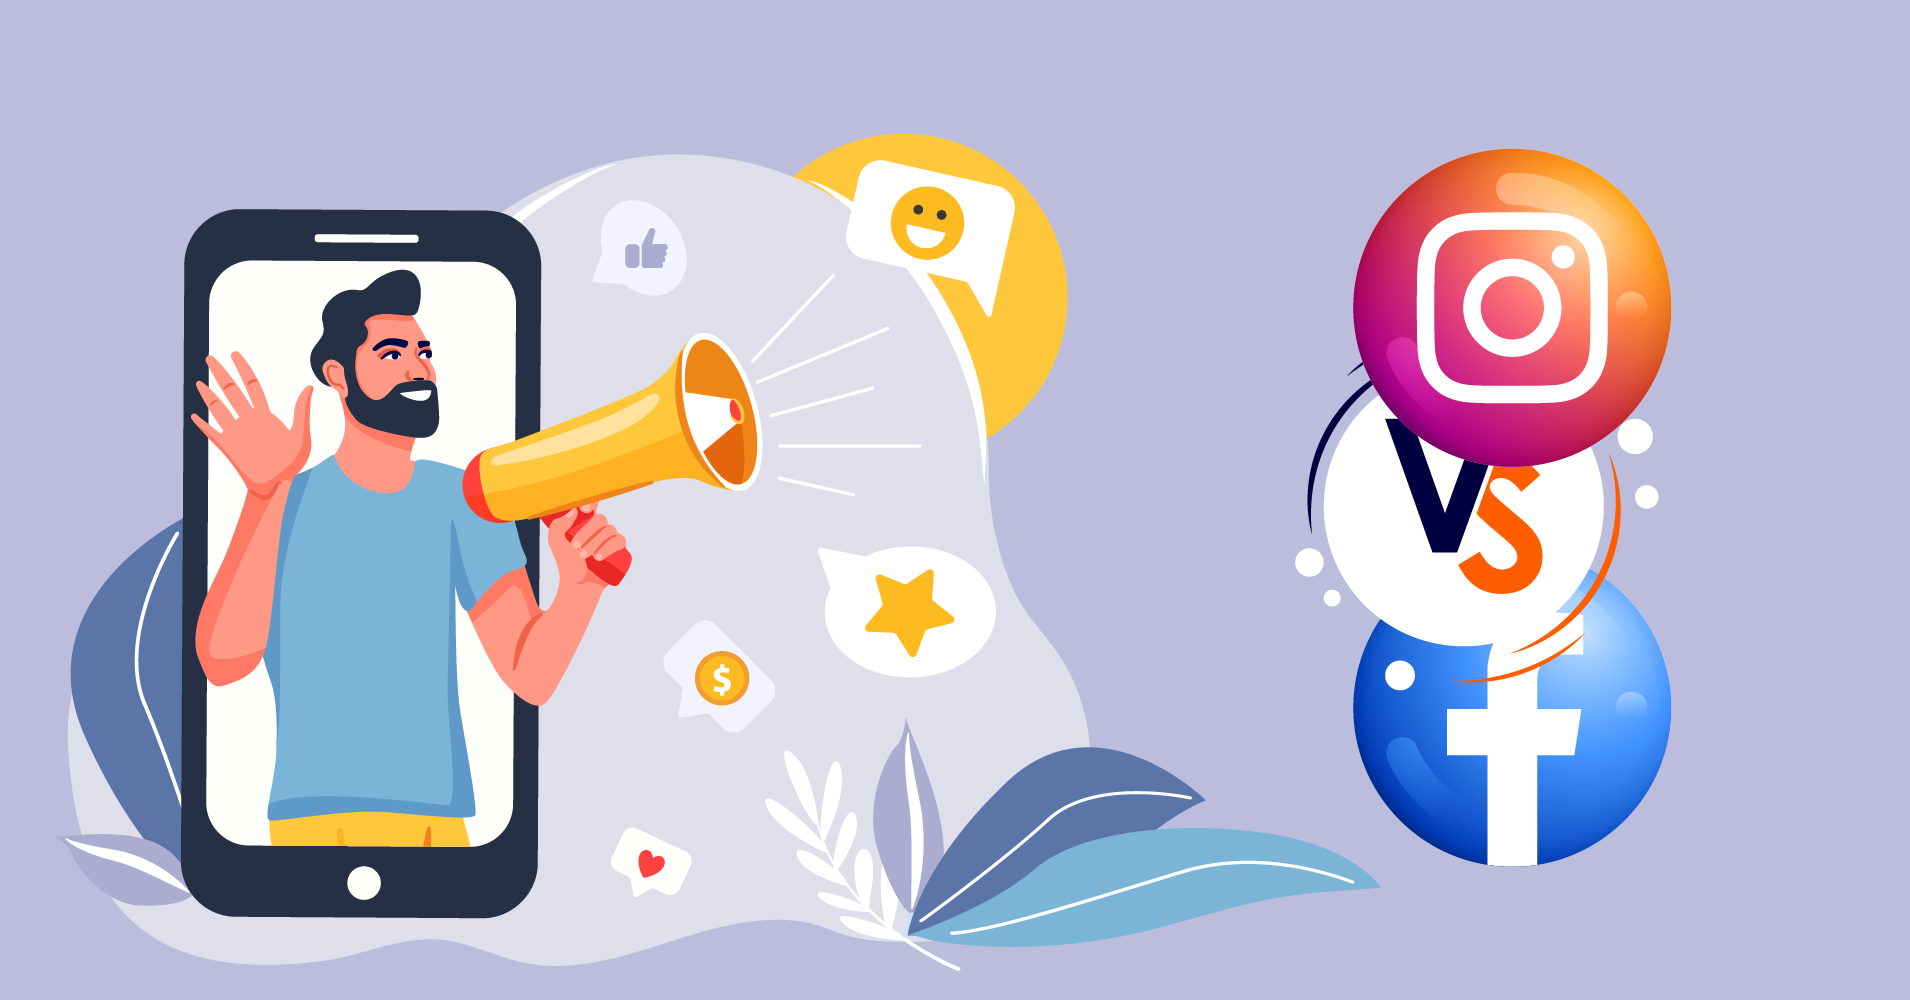 Instagram vs Facebook marketing differences and similarities